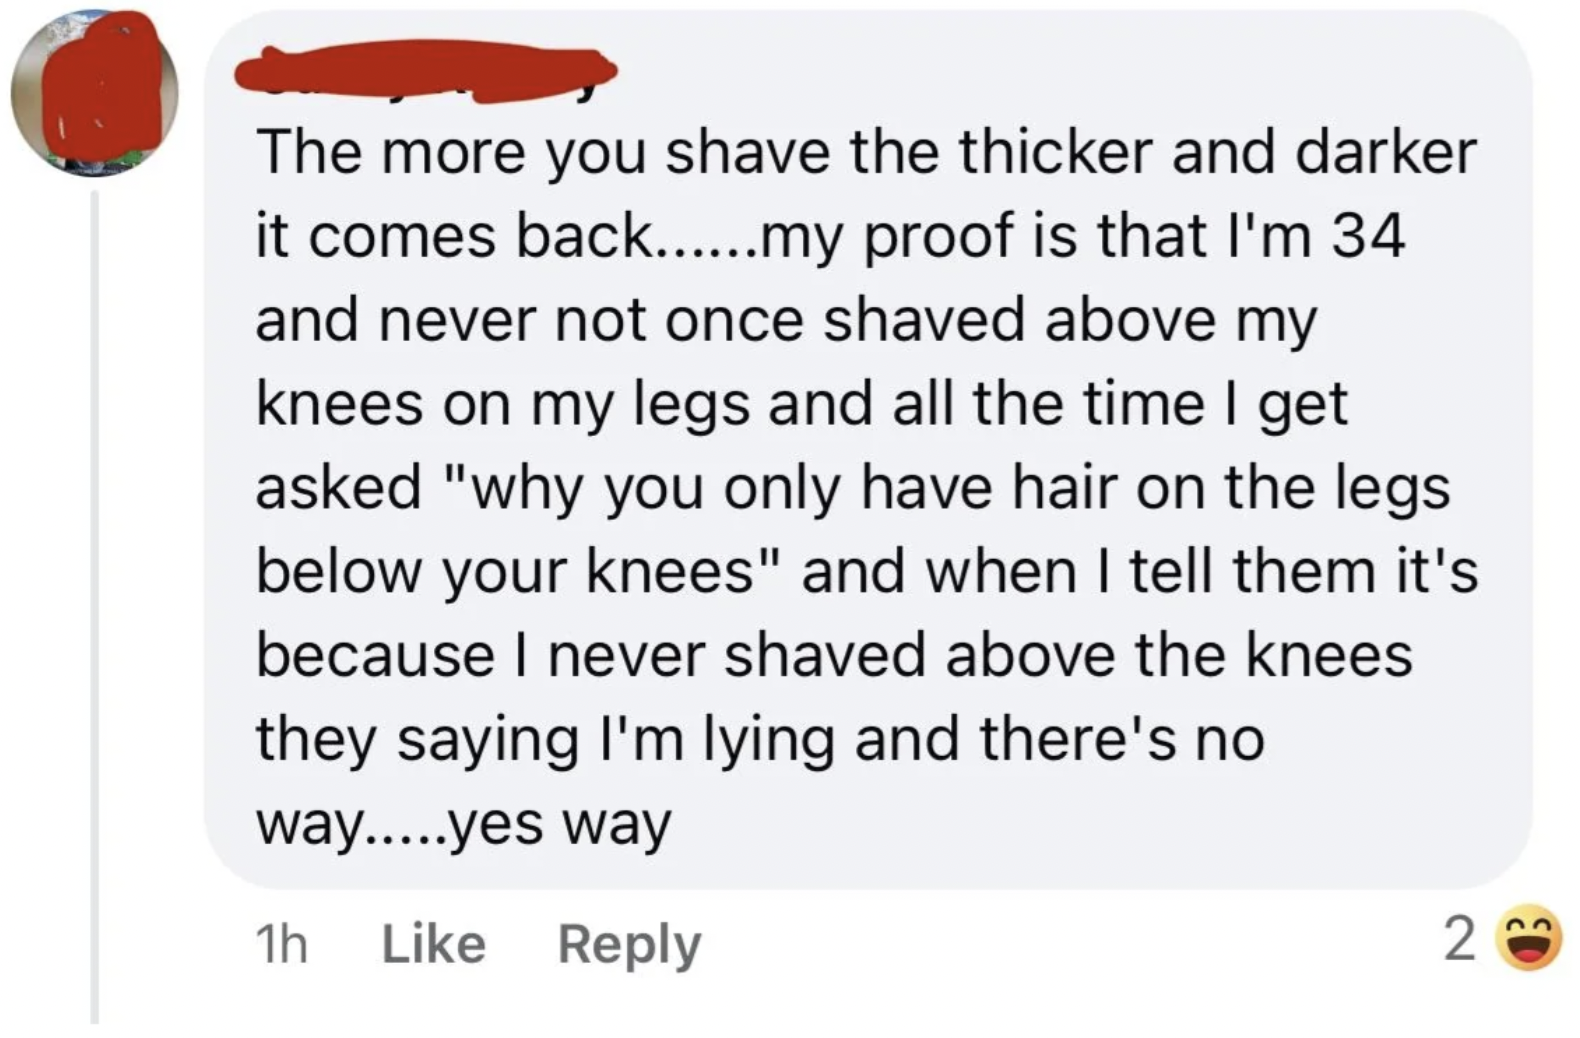 screenshot - The more you shave the thicker and darker it comes back......my proof is that I'm 34 and never not once shaved above my knees on my legs and all the time I get asked "why you only have hair on the legs below your knees" and when I tell them i